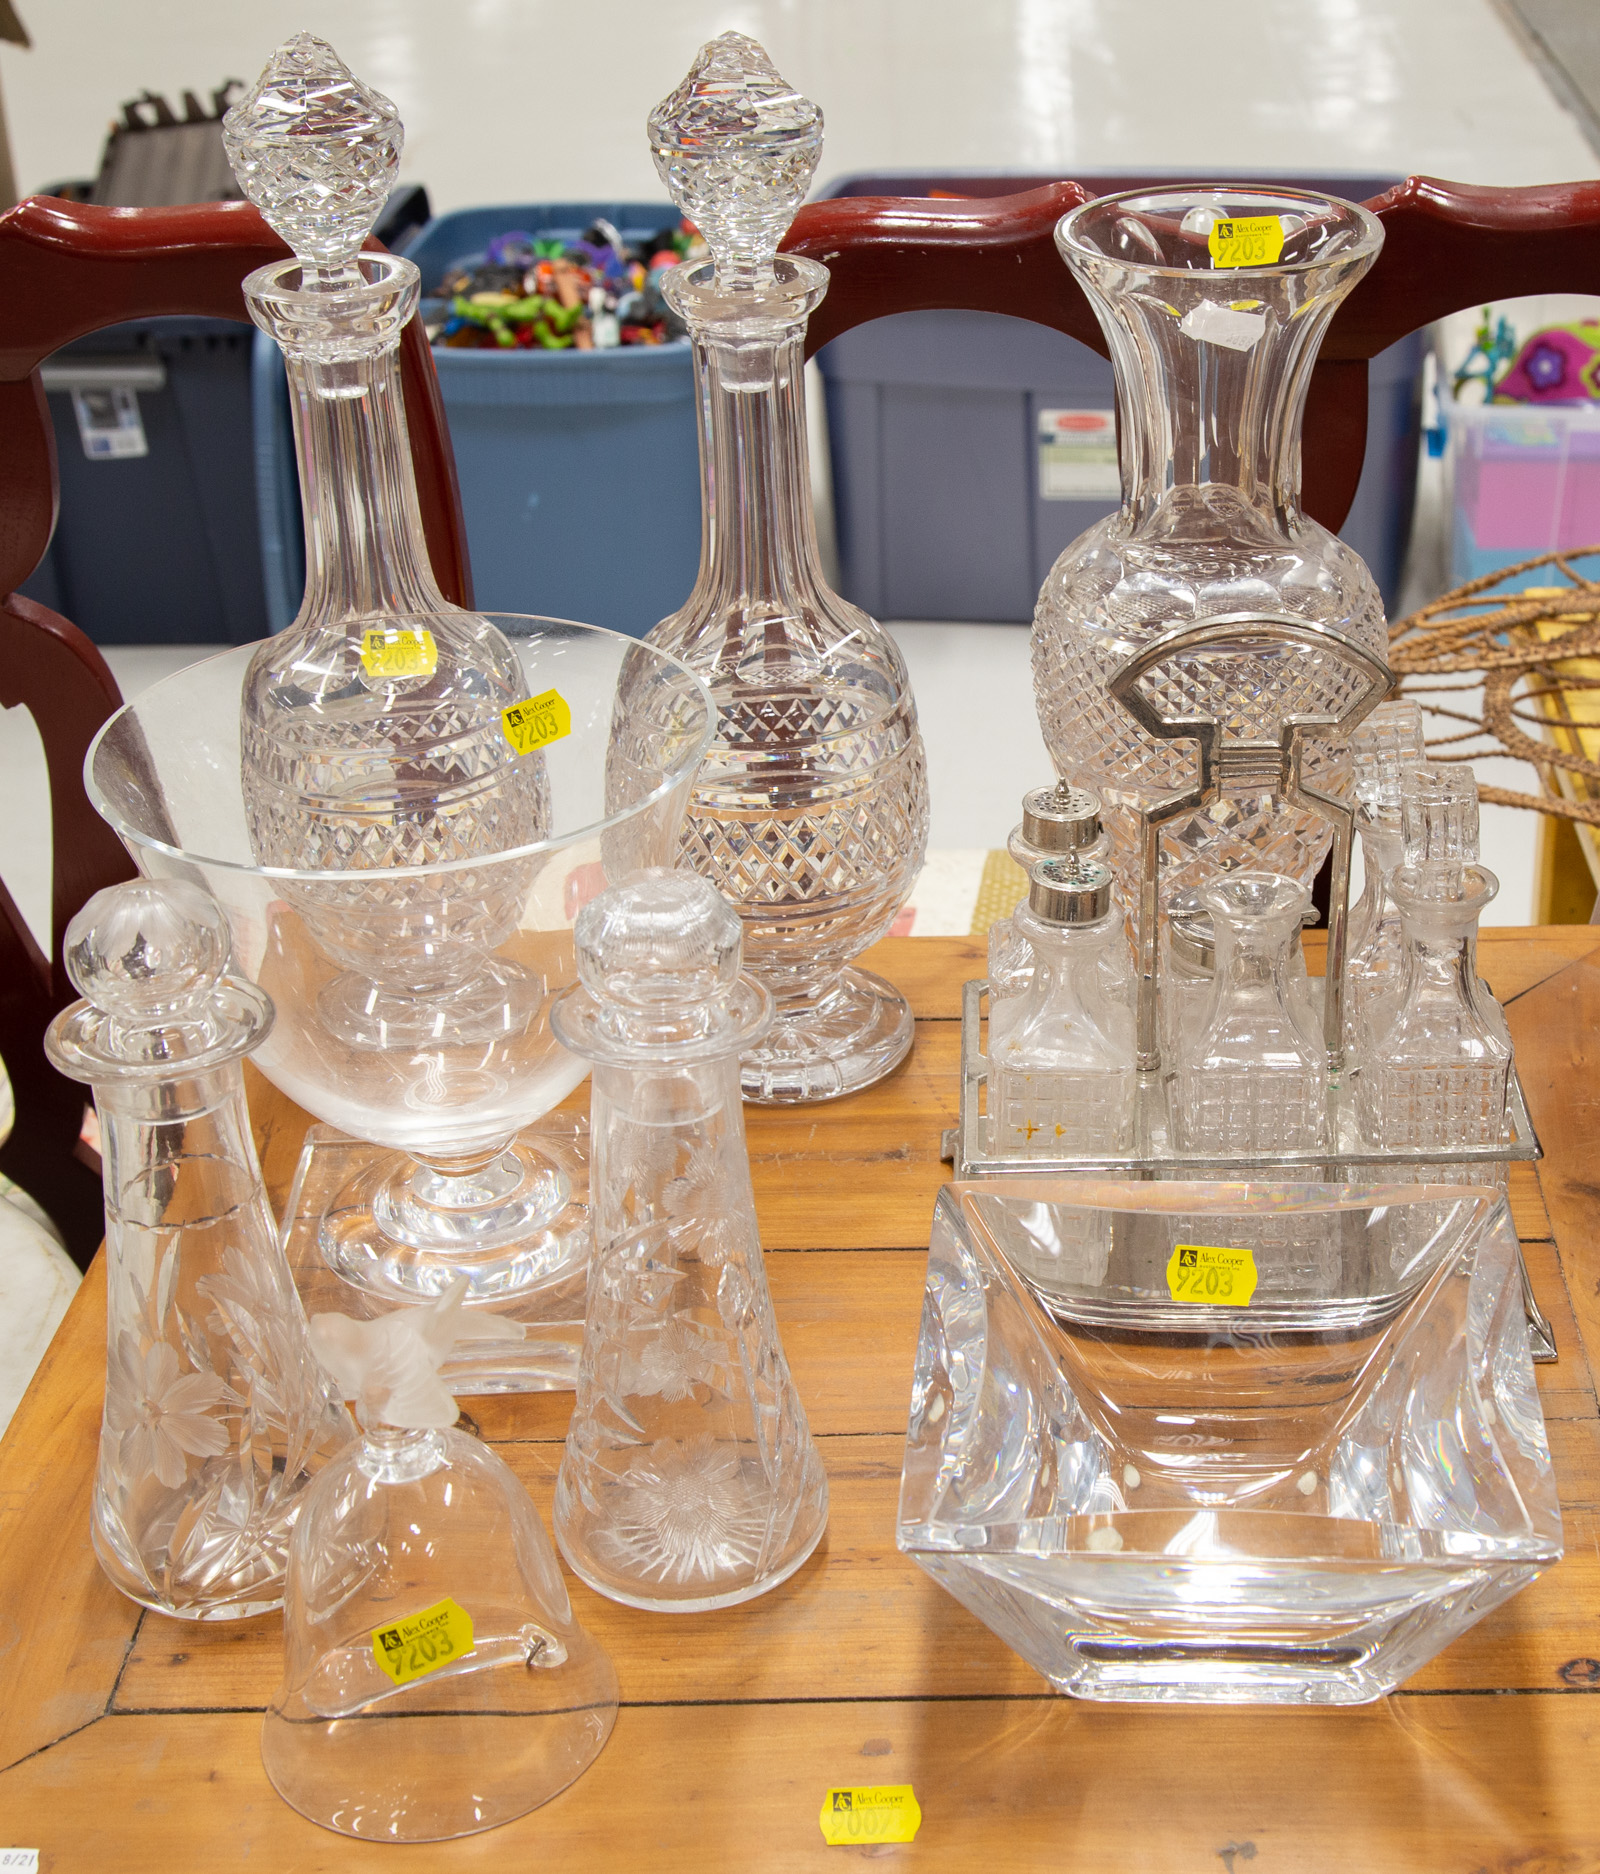 SELECTION OF HIGH QUALITY GLASSWARE 2881c2